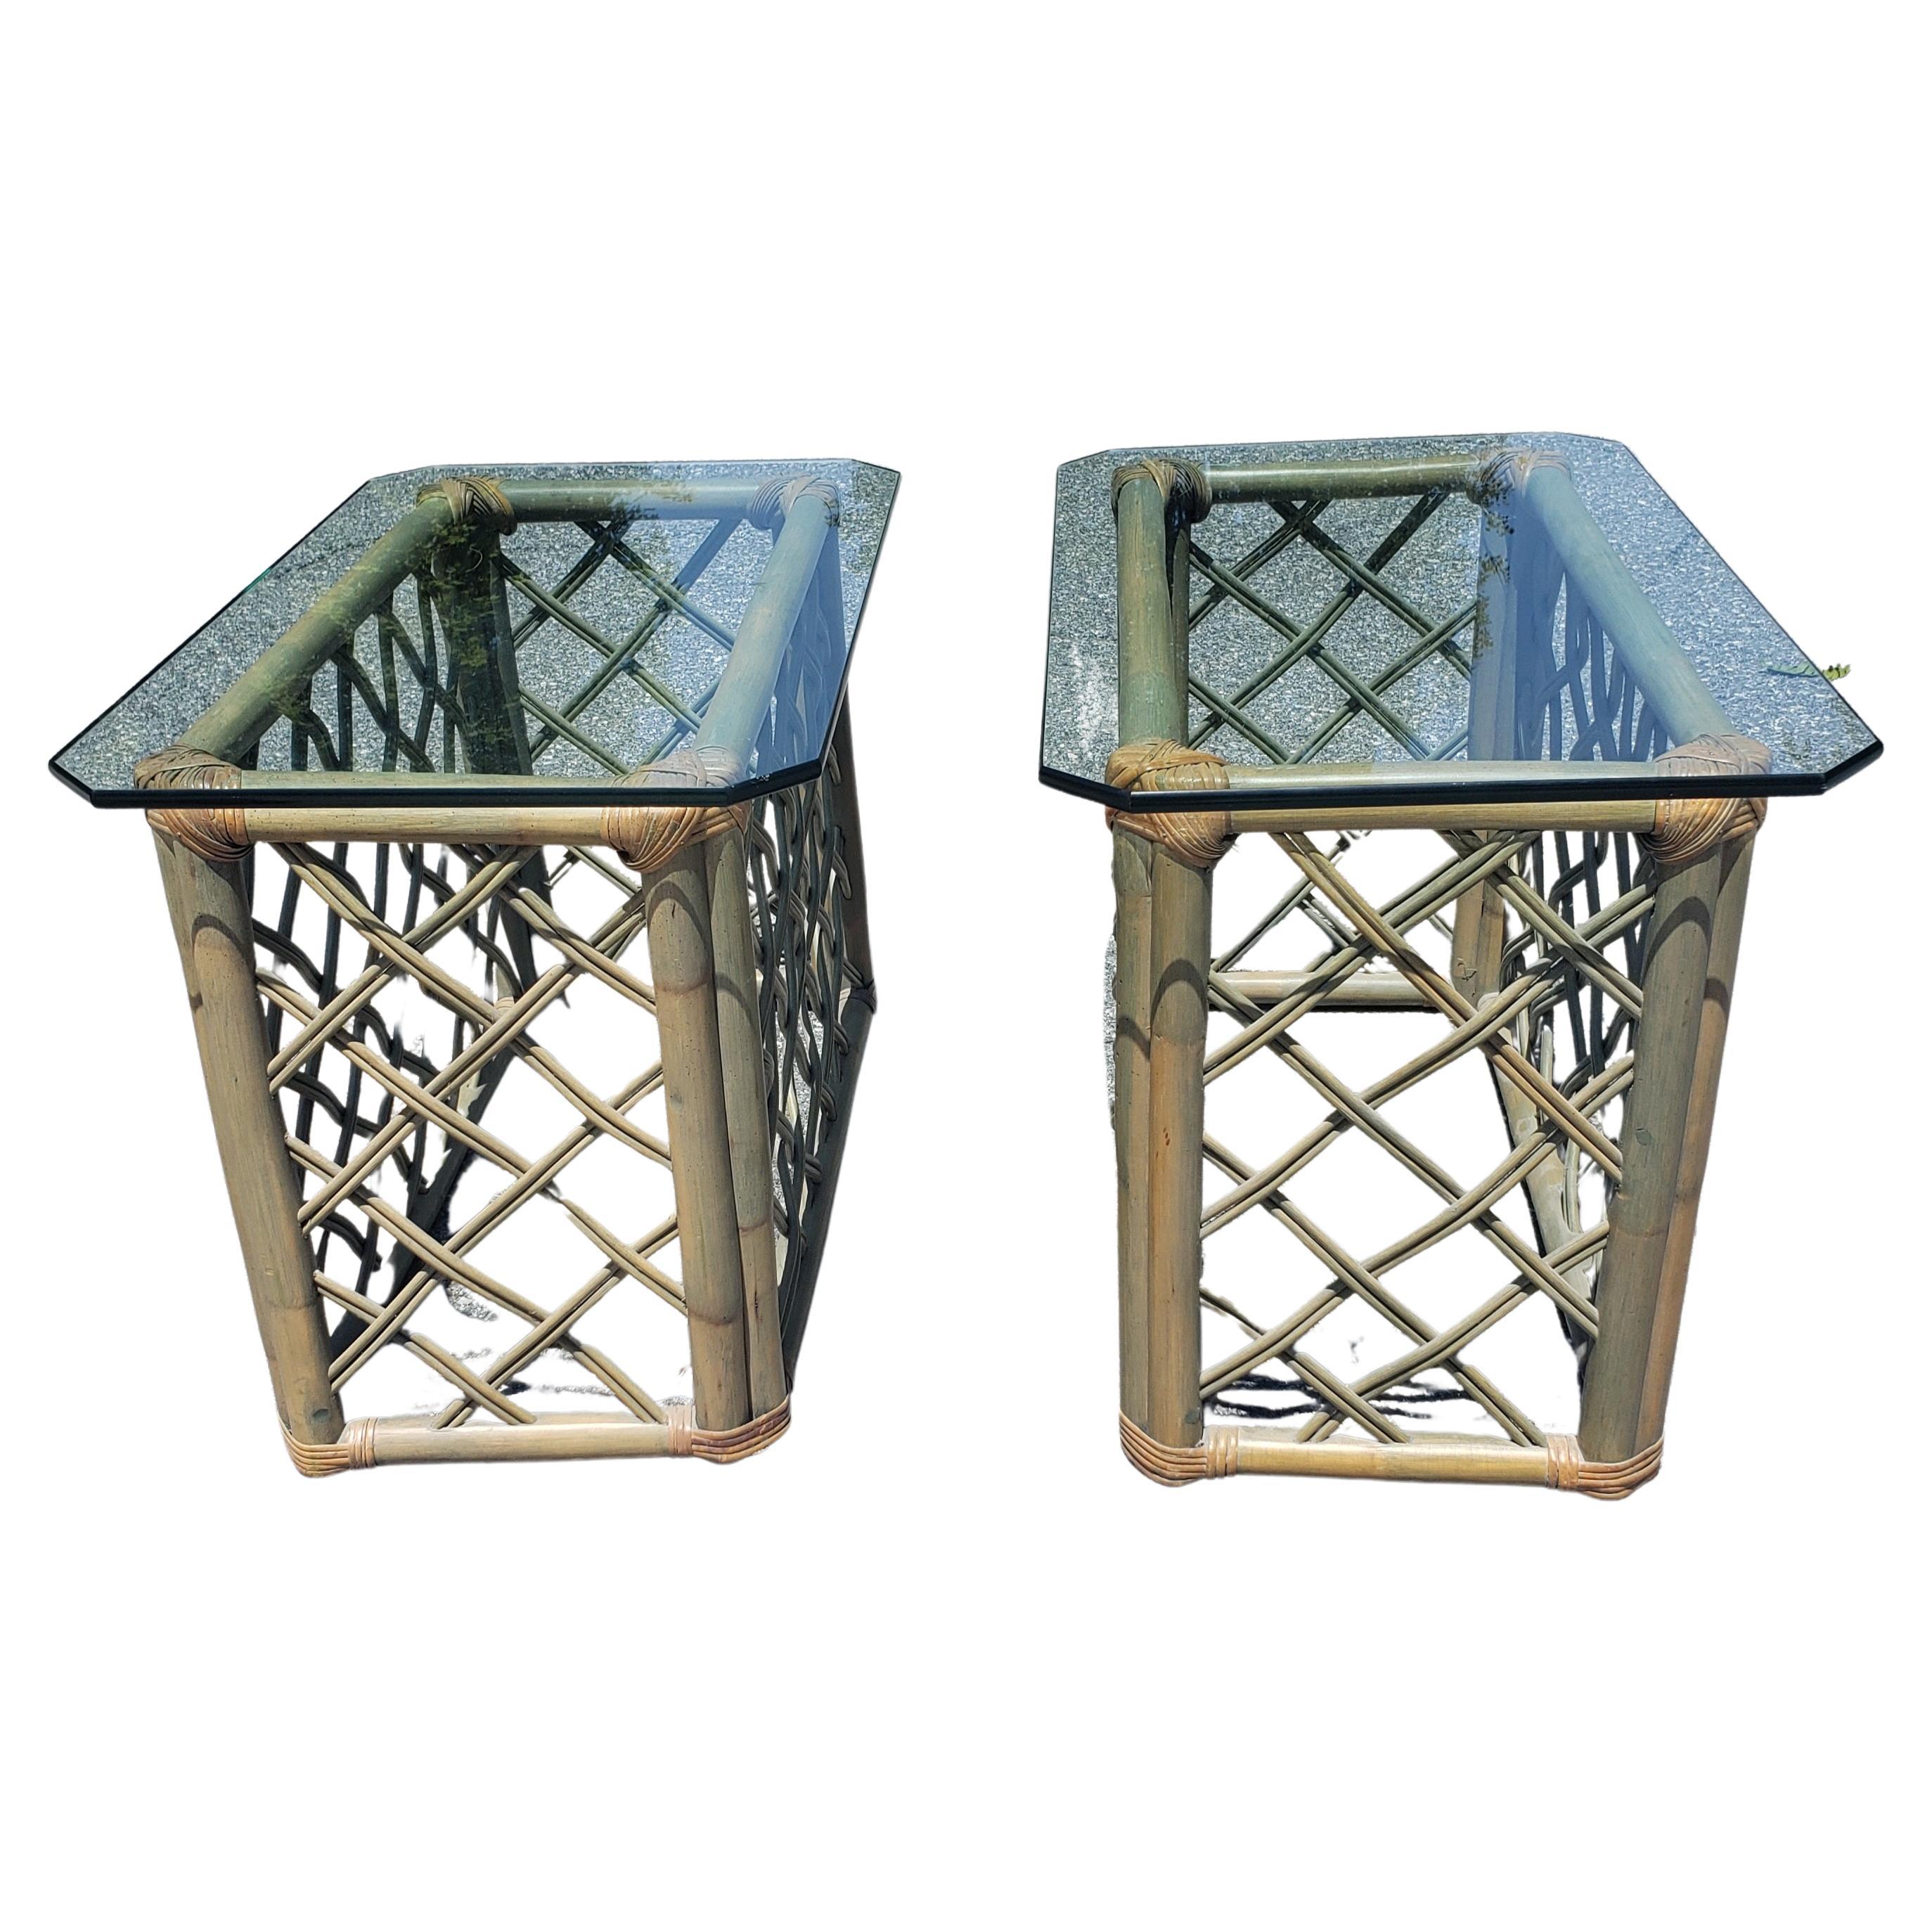 Vintage Jumbo Rattan Glass Top Side Tables in Turquoise-Champaign Color For Sale